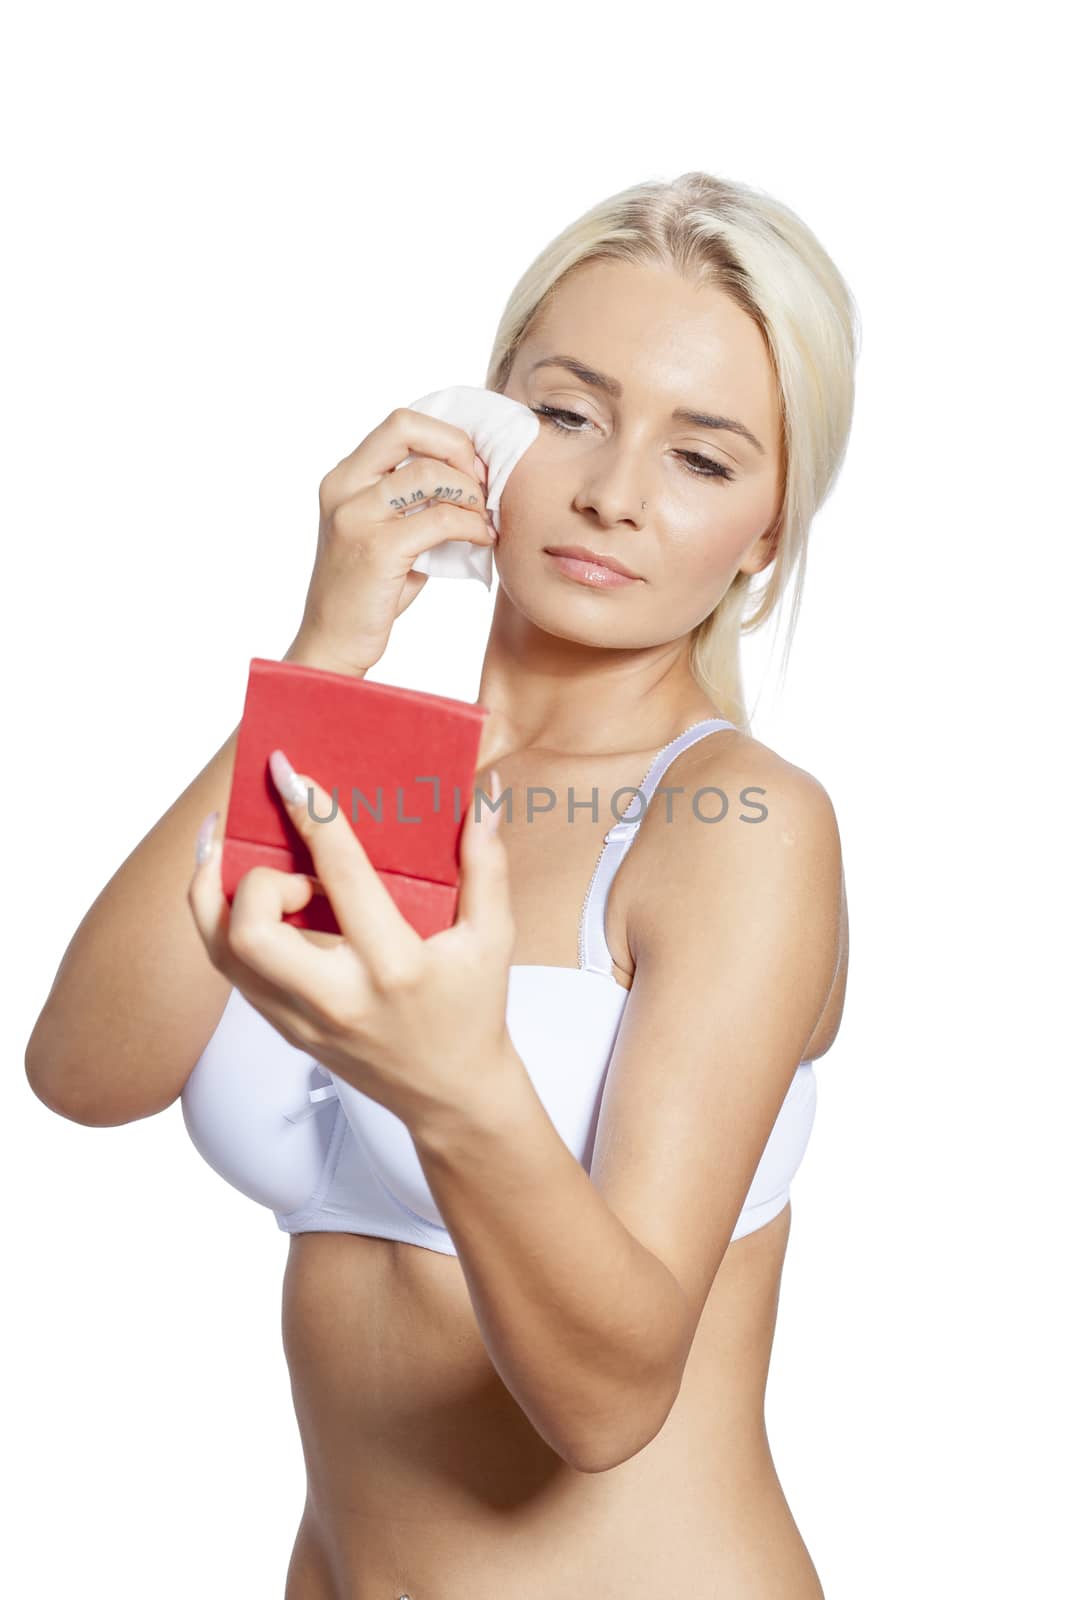 Young woman clean face and eyes with wet wipes, holding mirror, remove make-up, body breast lingerie